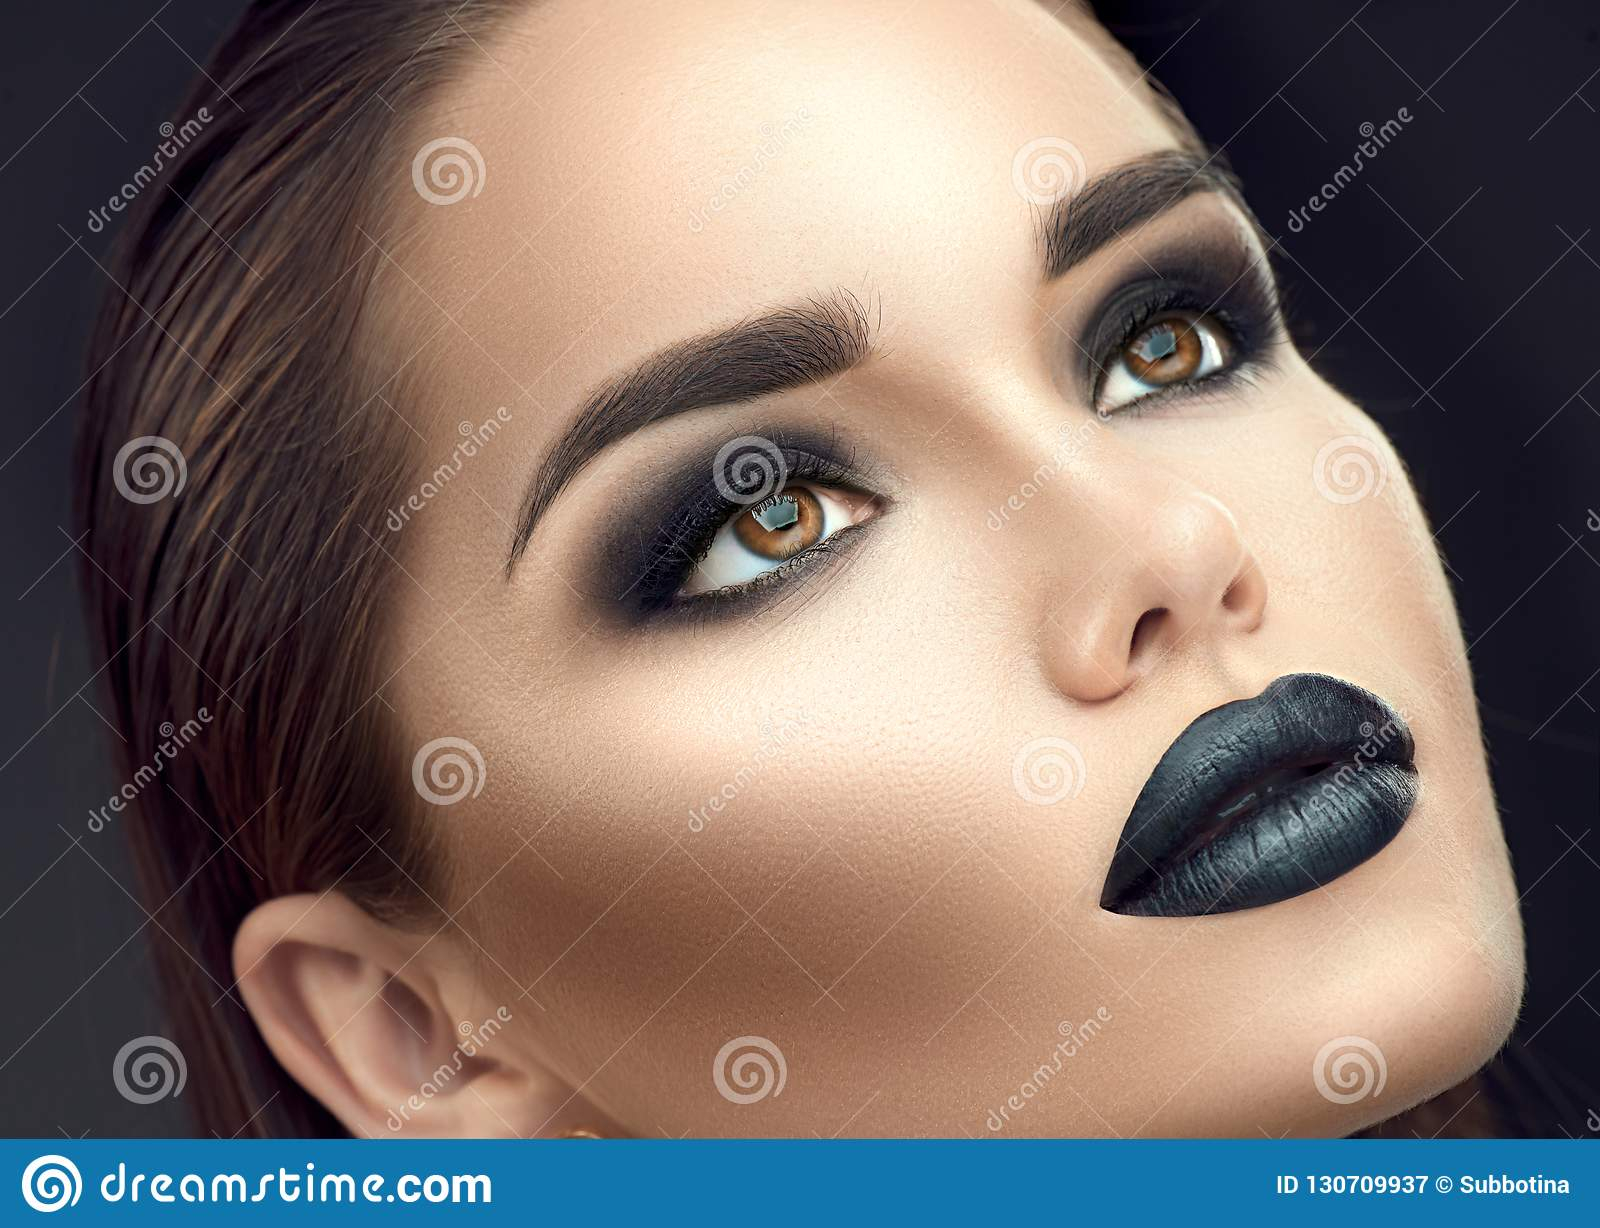 Gothic Eye Makeup Fashion Model Girl Portrait With Trendy Gothic Black Makeup Young